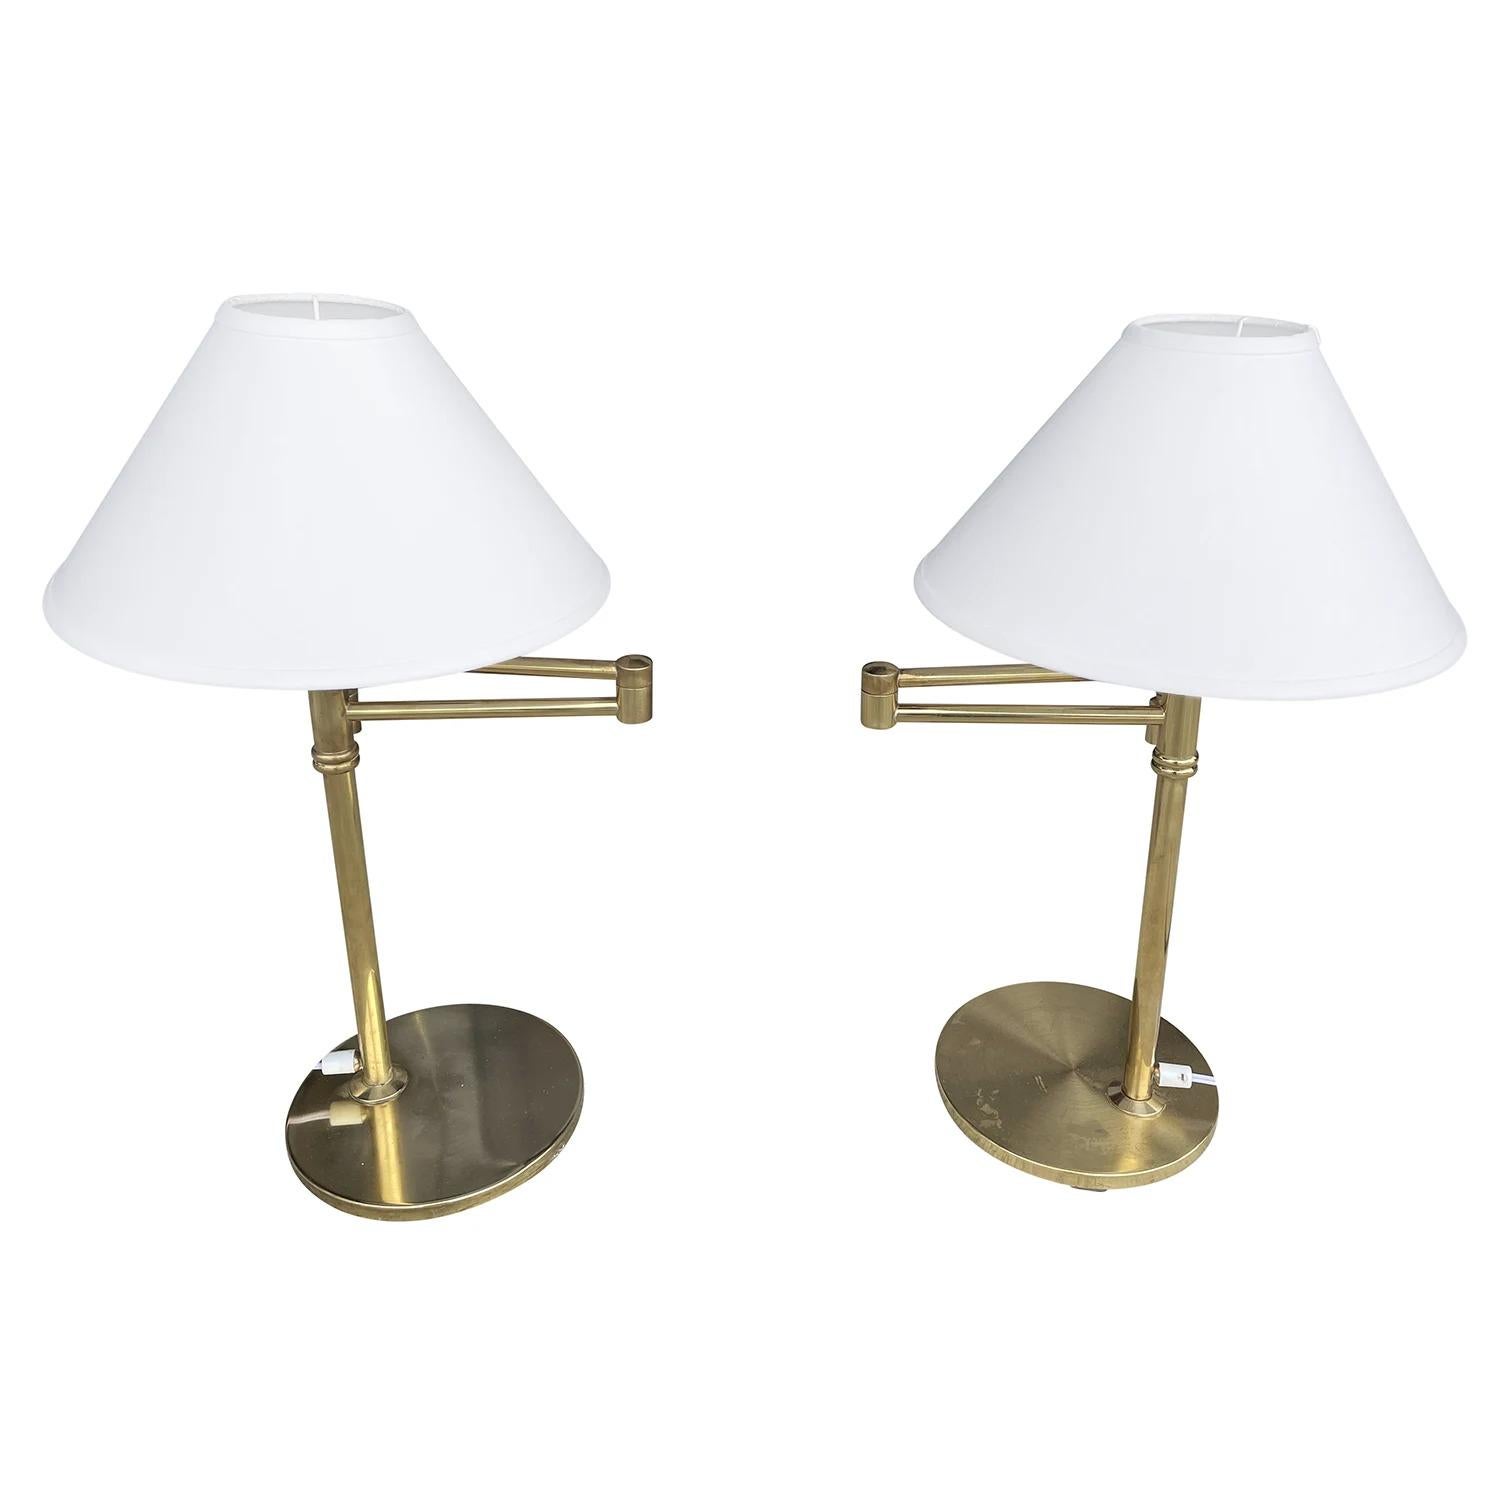 A vintage Mid-Century Modern Swedish pair of reading table lamps made of hand crafted polished brass, produced by EWÅ, Värnamo in good condition. The two long flexible, adjustable arms of the Scandinavian desk lights are ideally for reading,